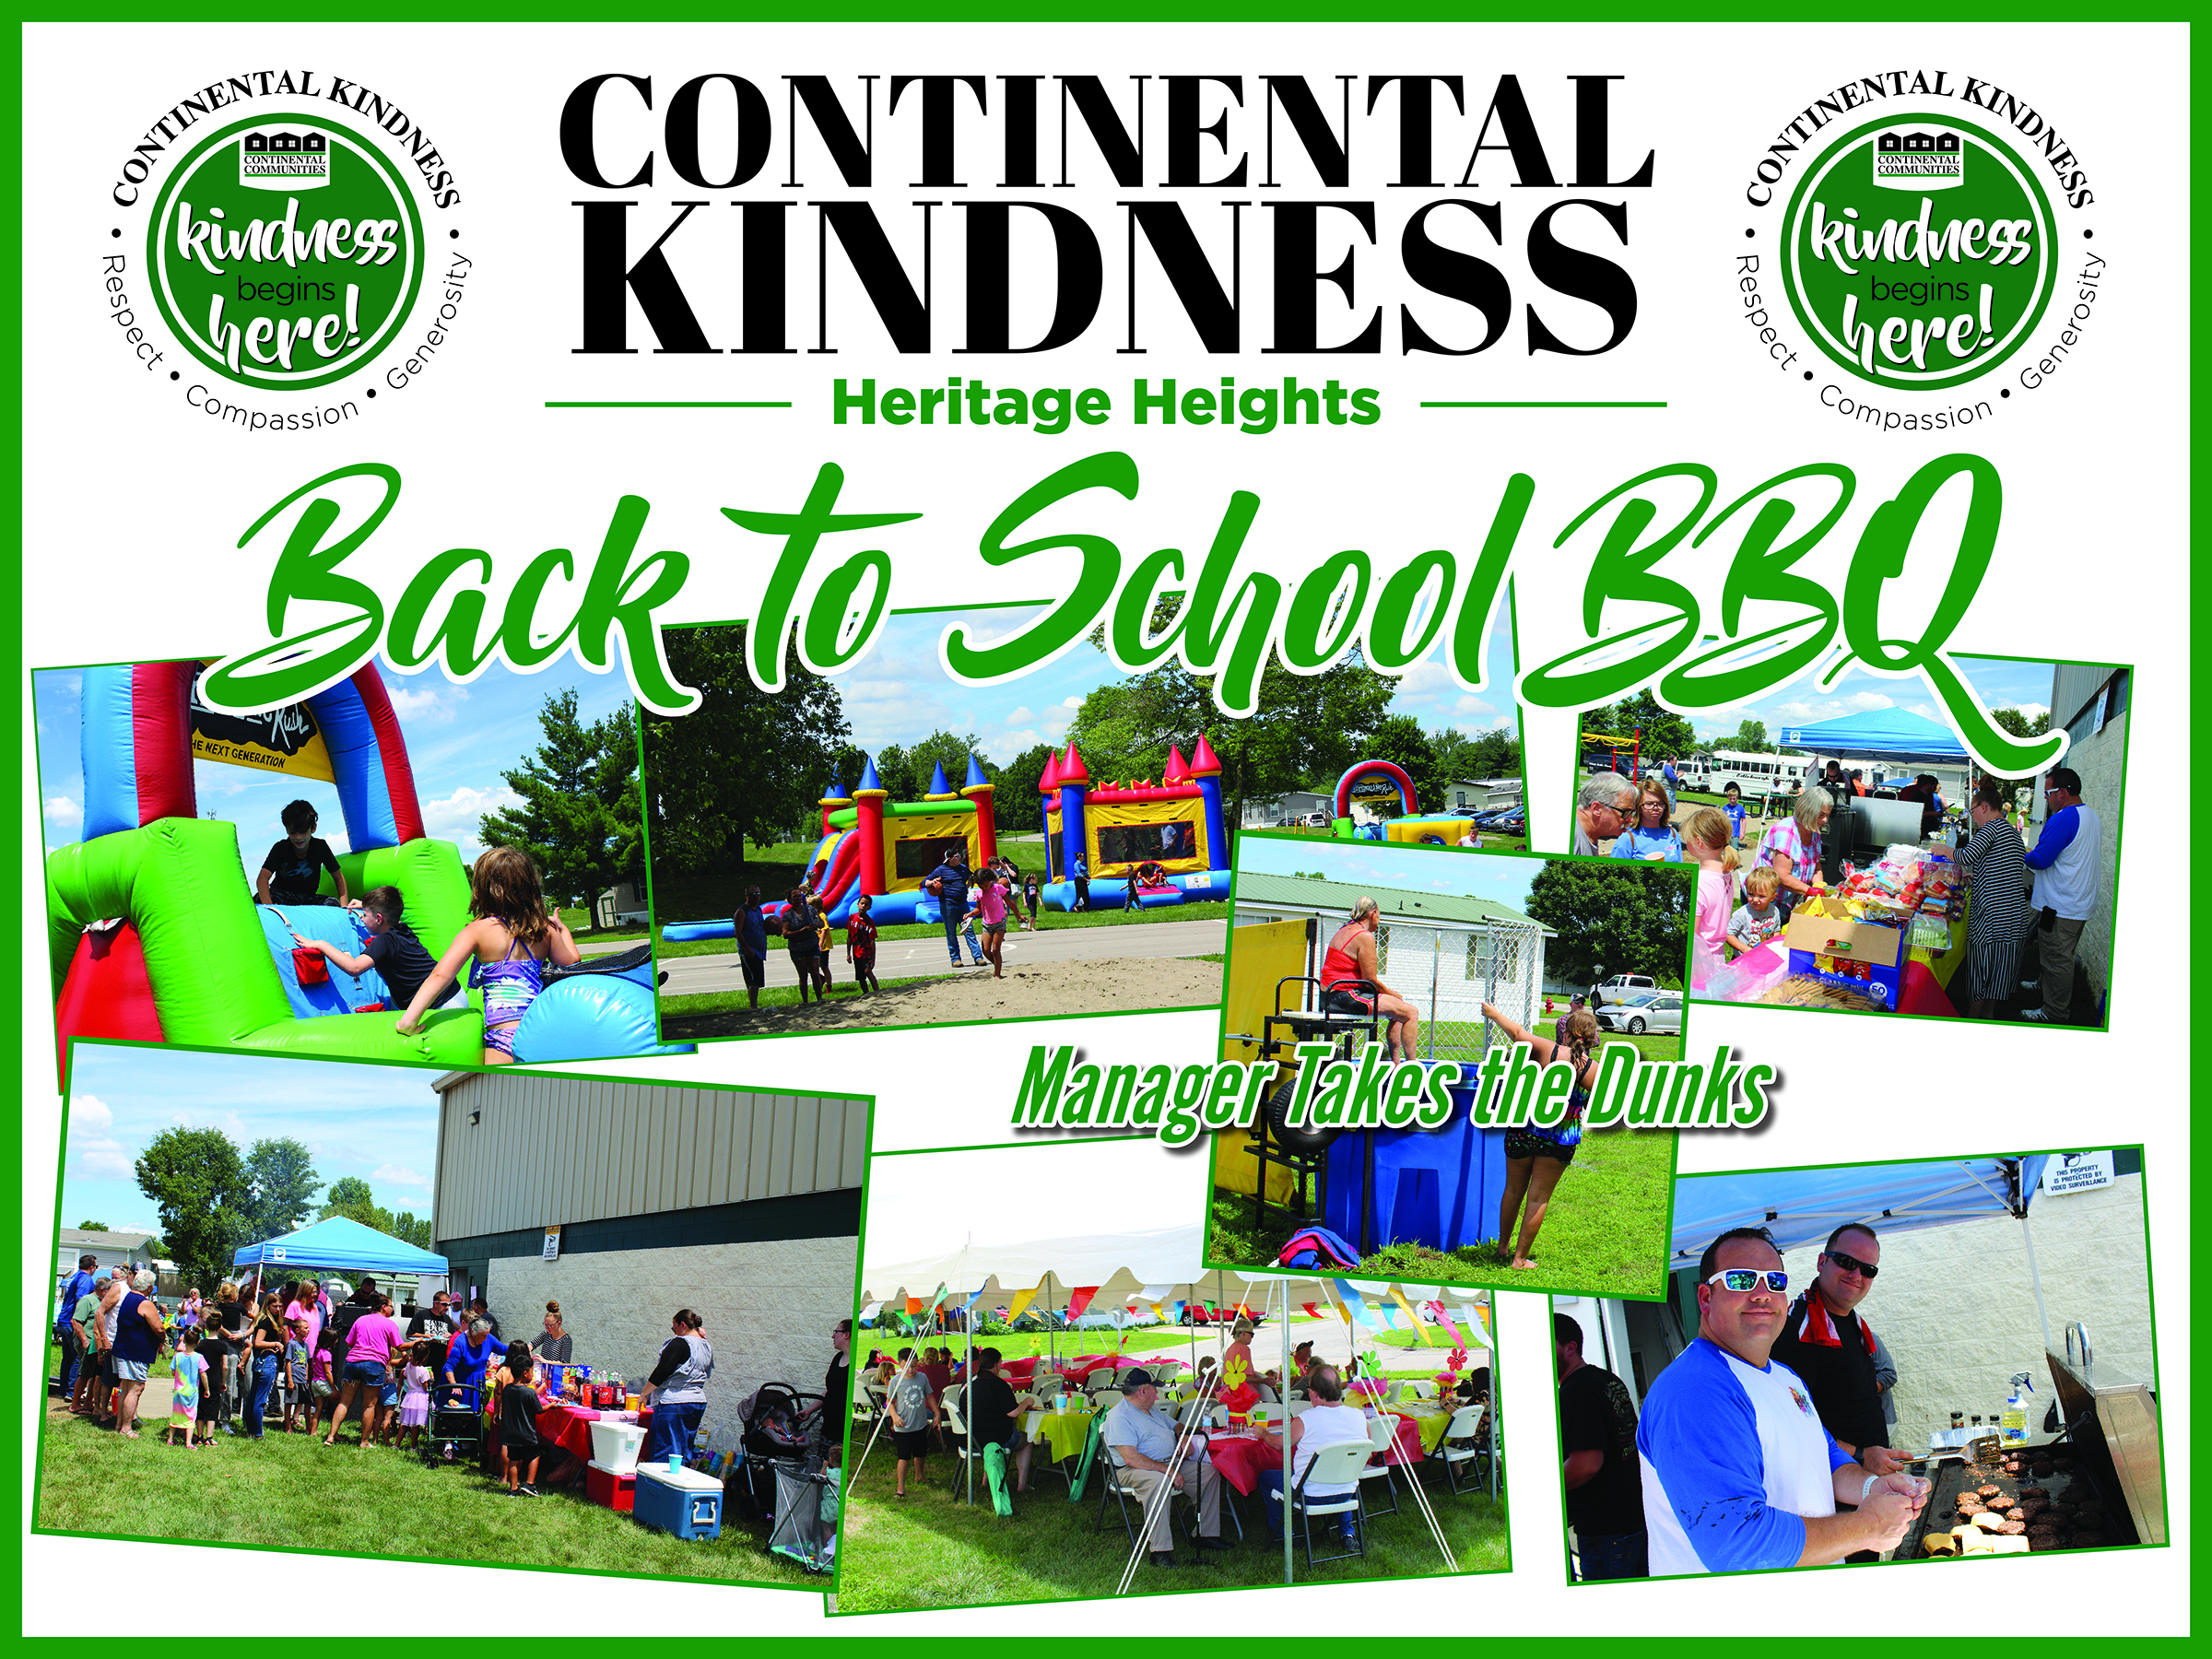 Continental Kindness Heritage Heights Back to School BBQ